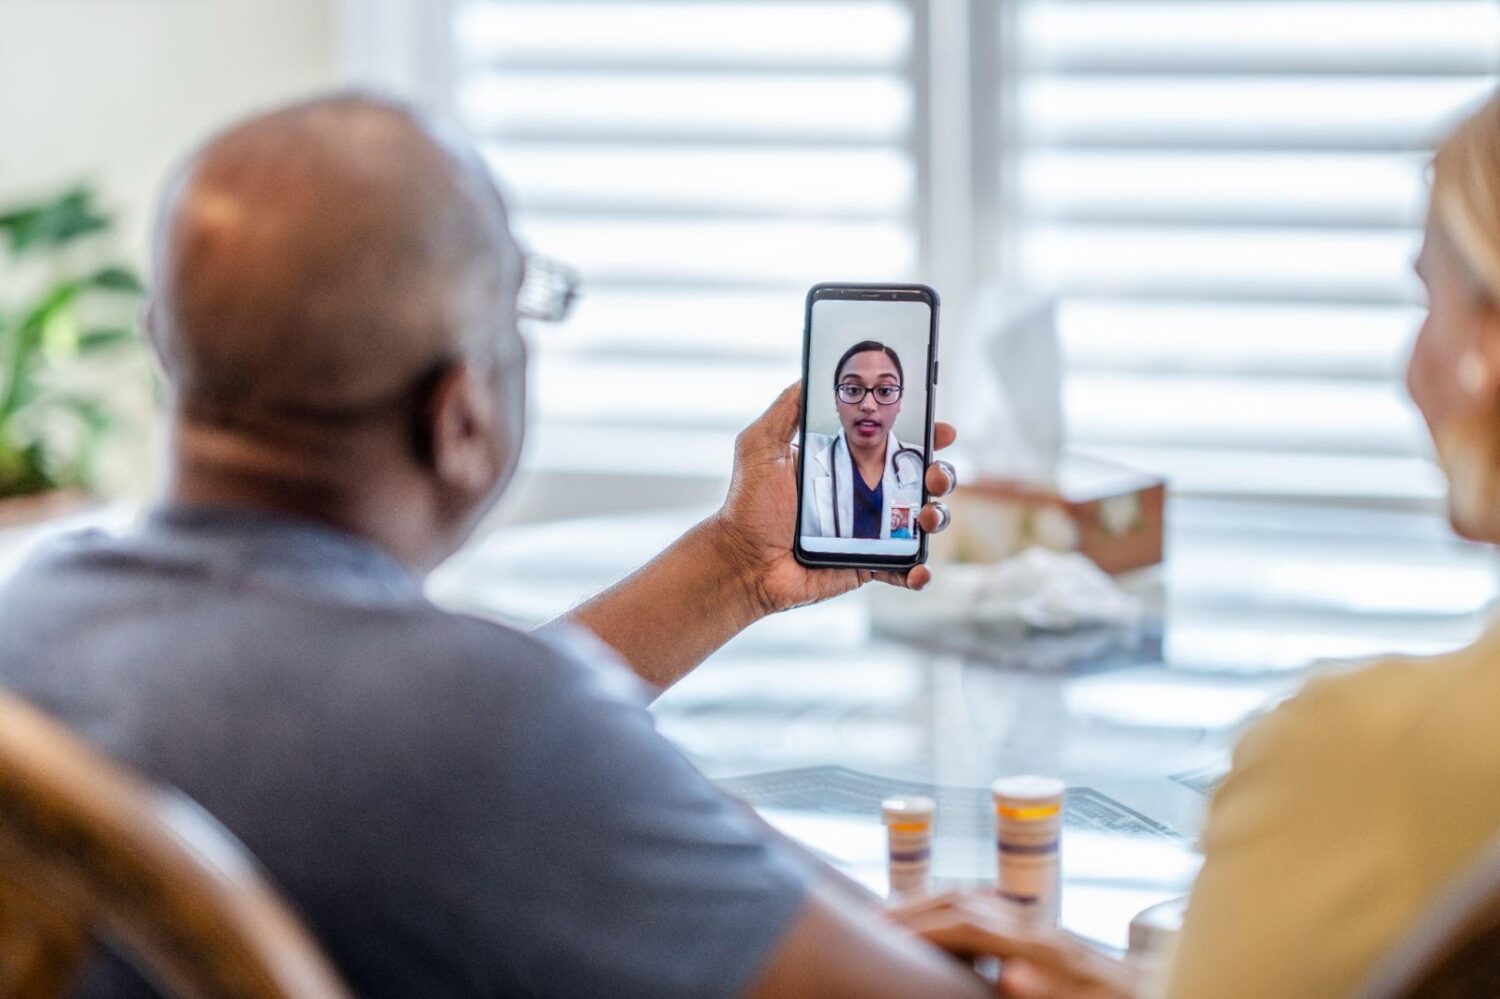 Zoom Expands Access to Telehealth